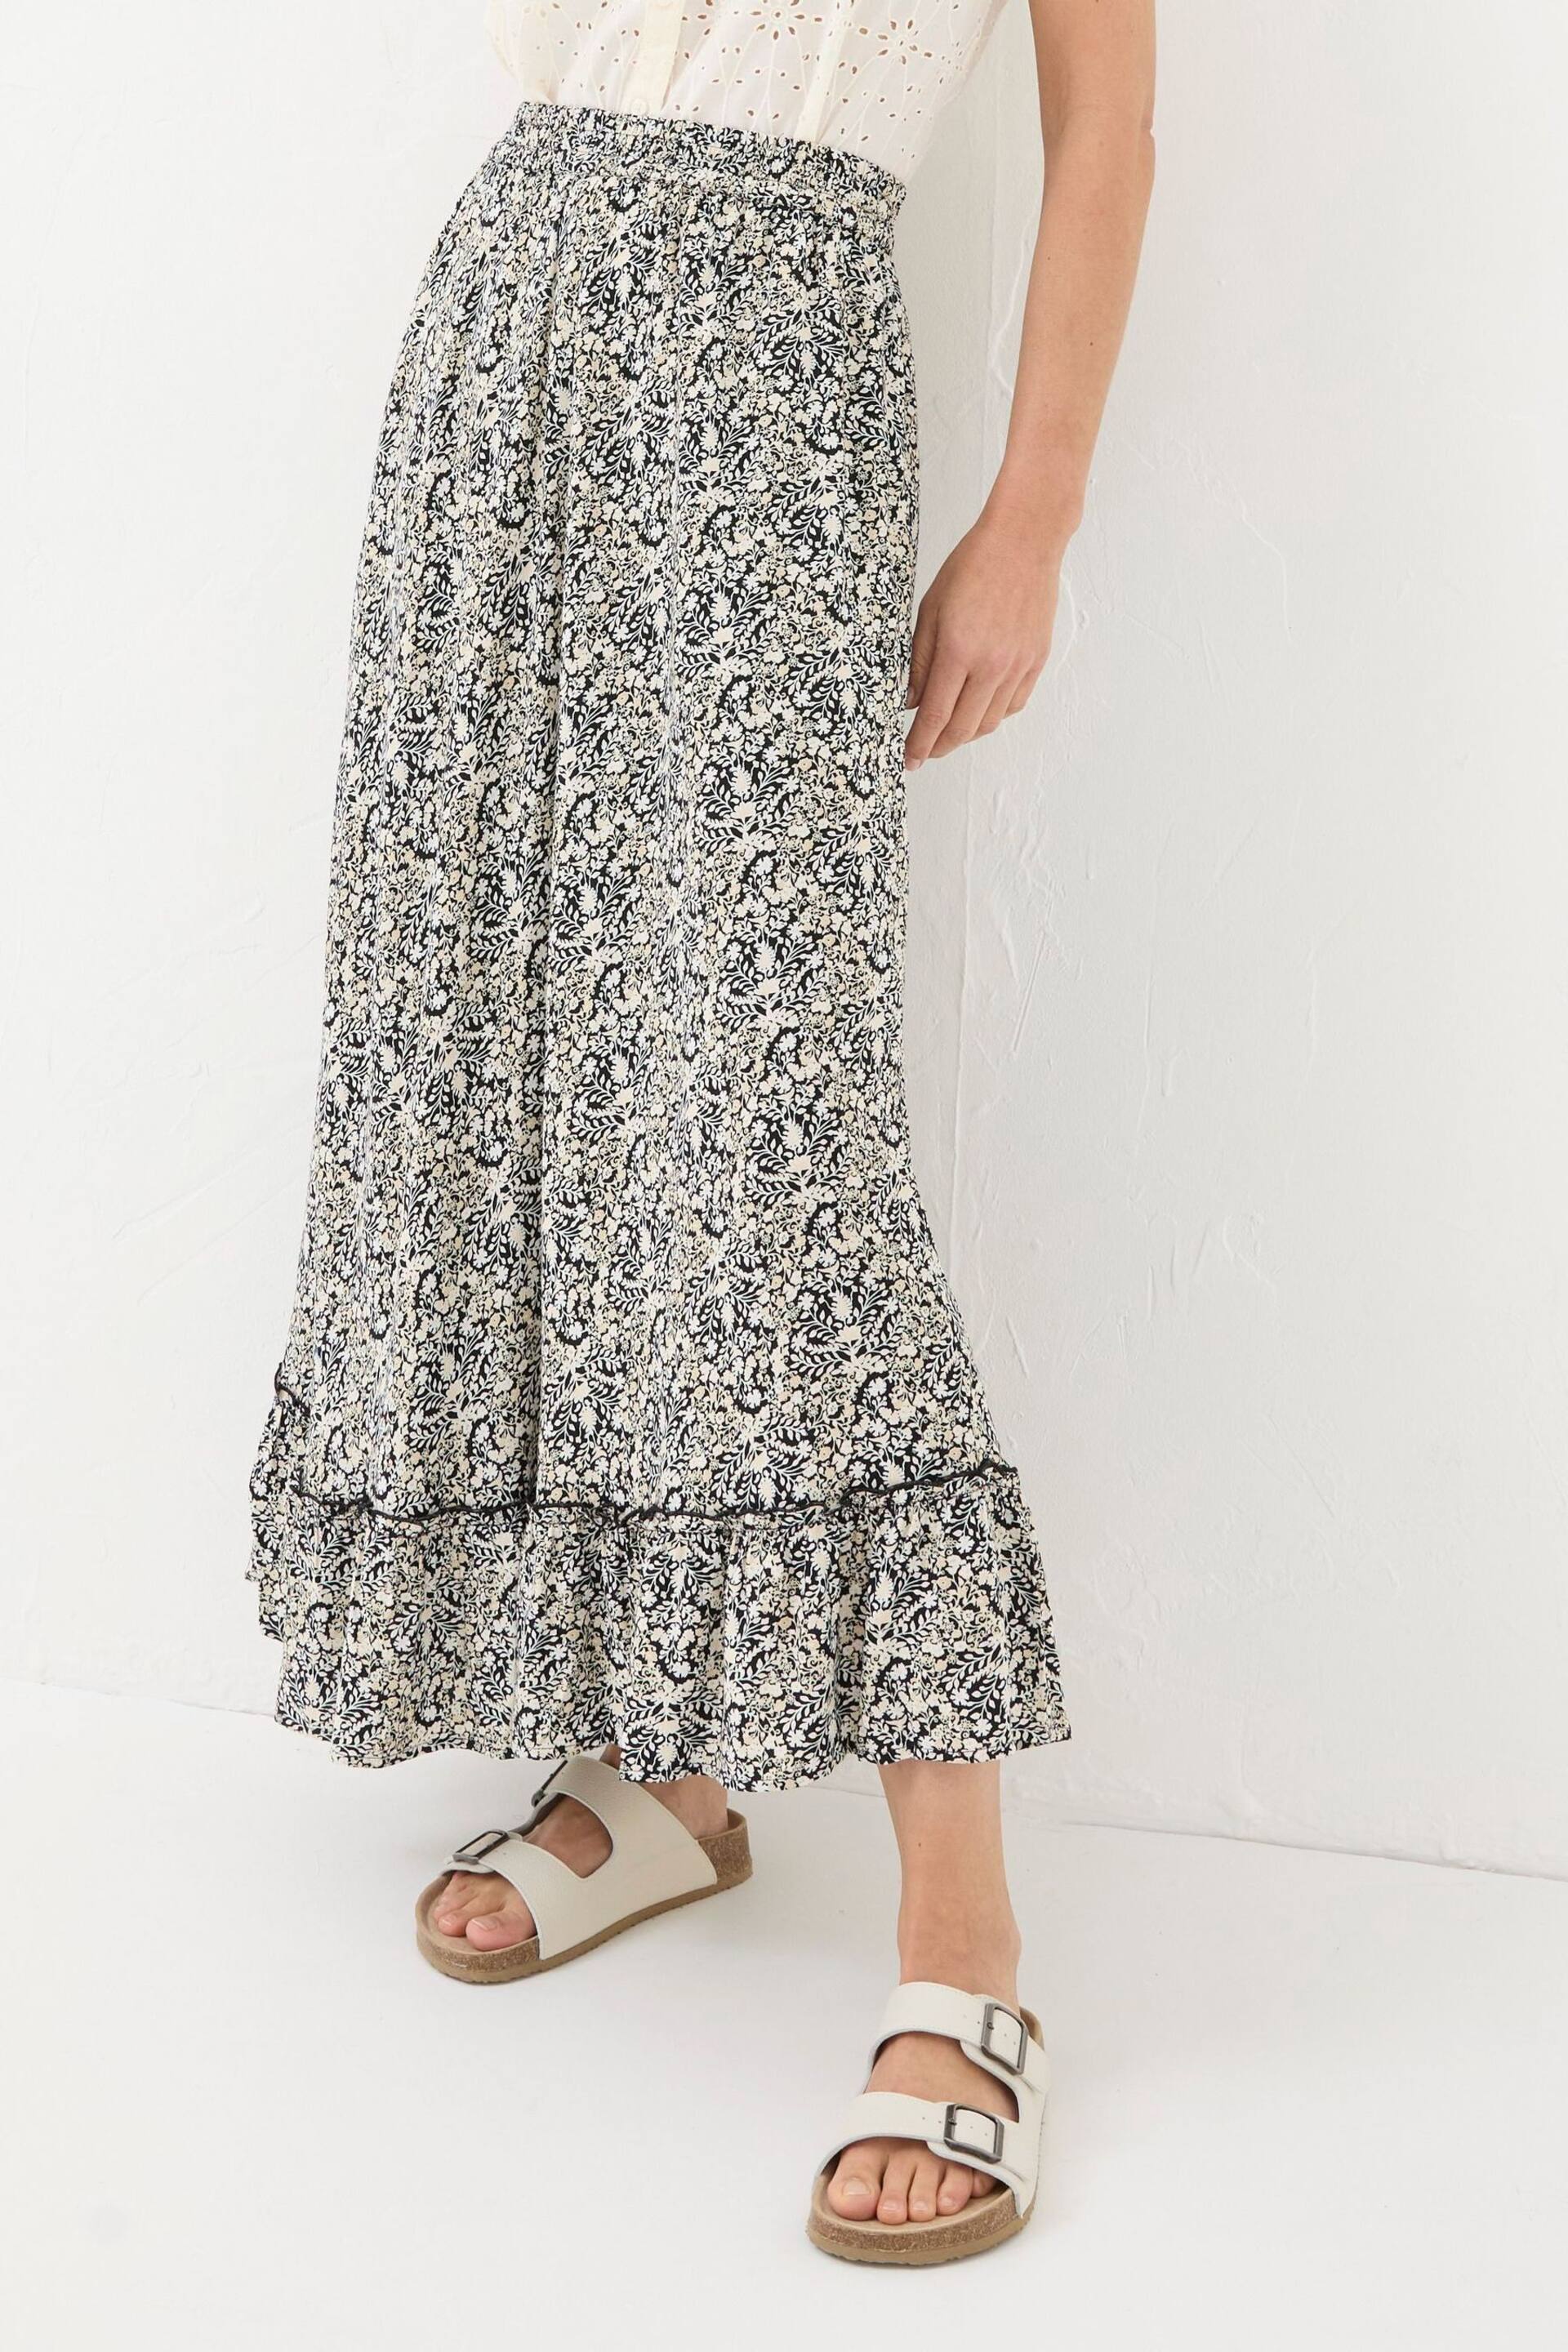 FatFace Black Lissy Inlay Floral Maxi Skirt - Image 3 of 6